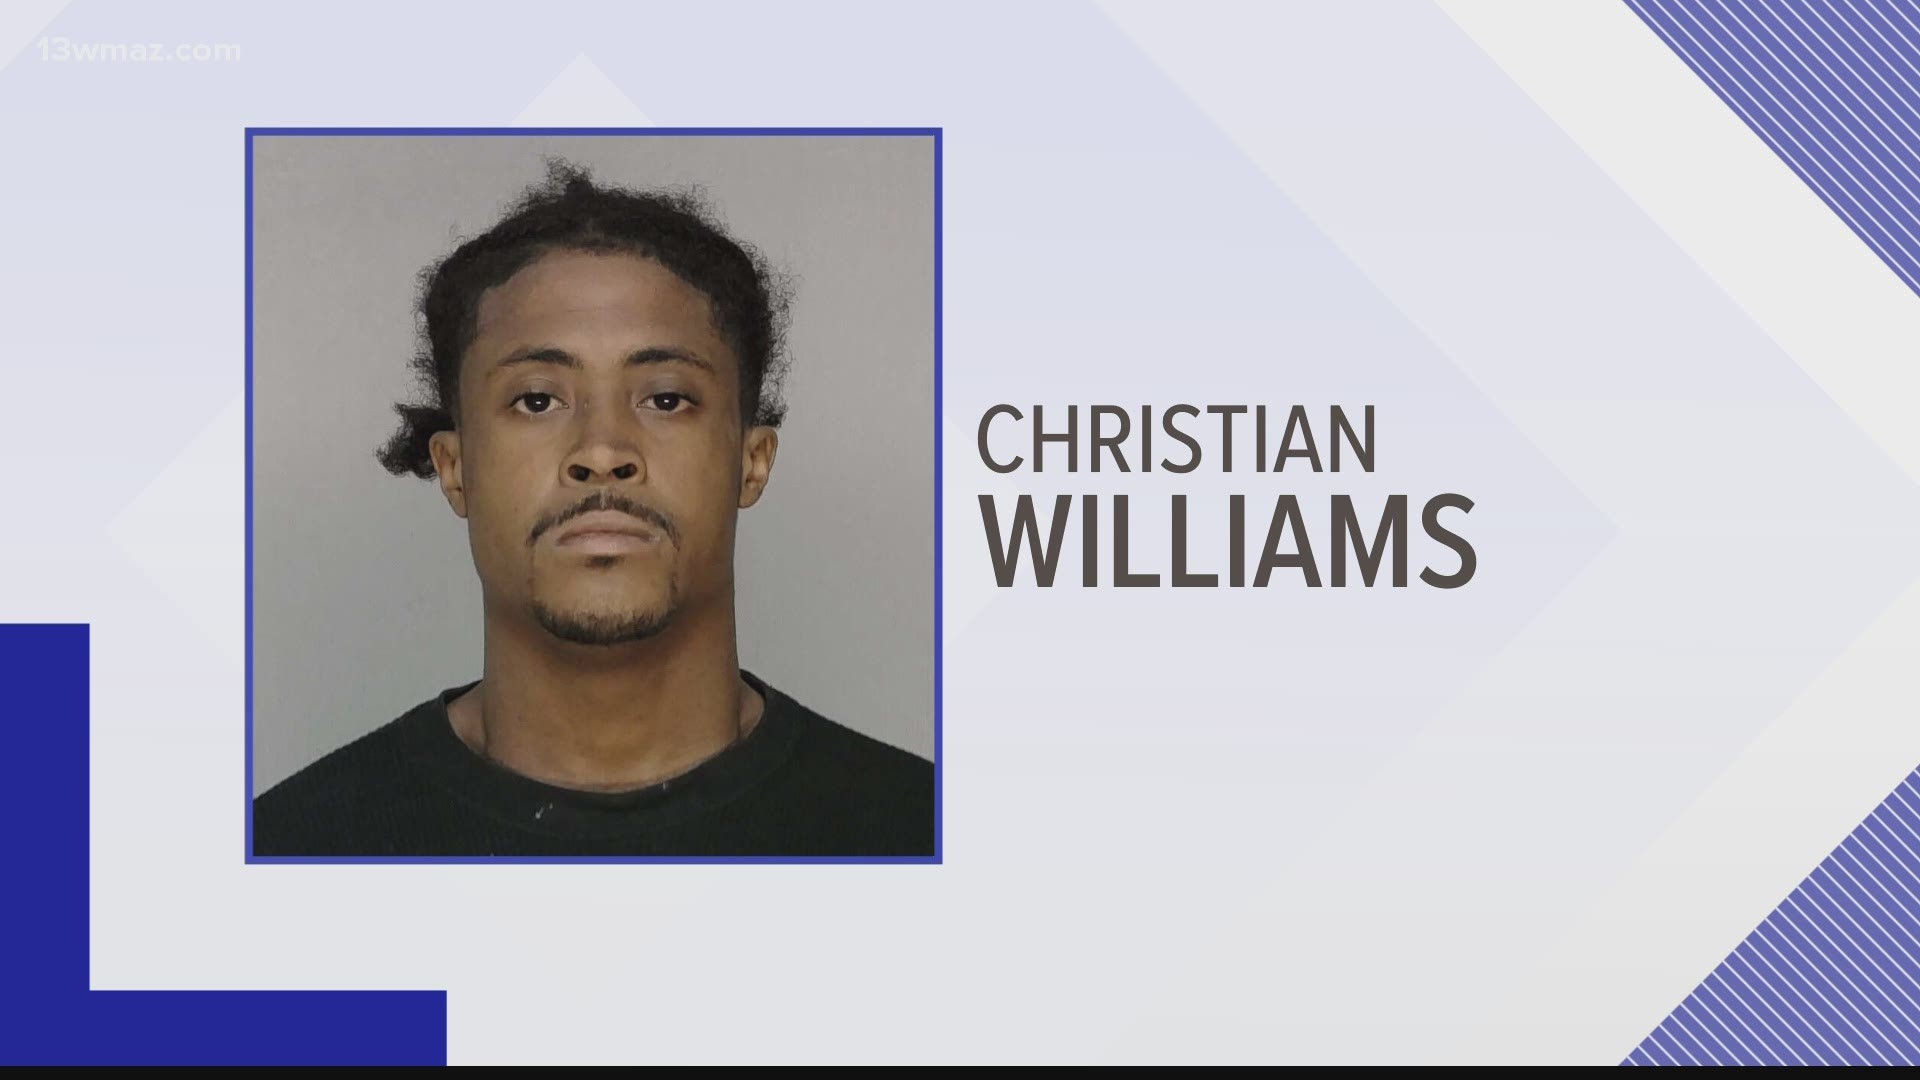 21-year-old Christian Desmond Williams was arrested Thursday in the murder of 27-year-old Gregory Watkins.